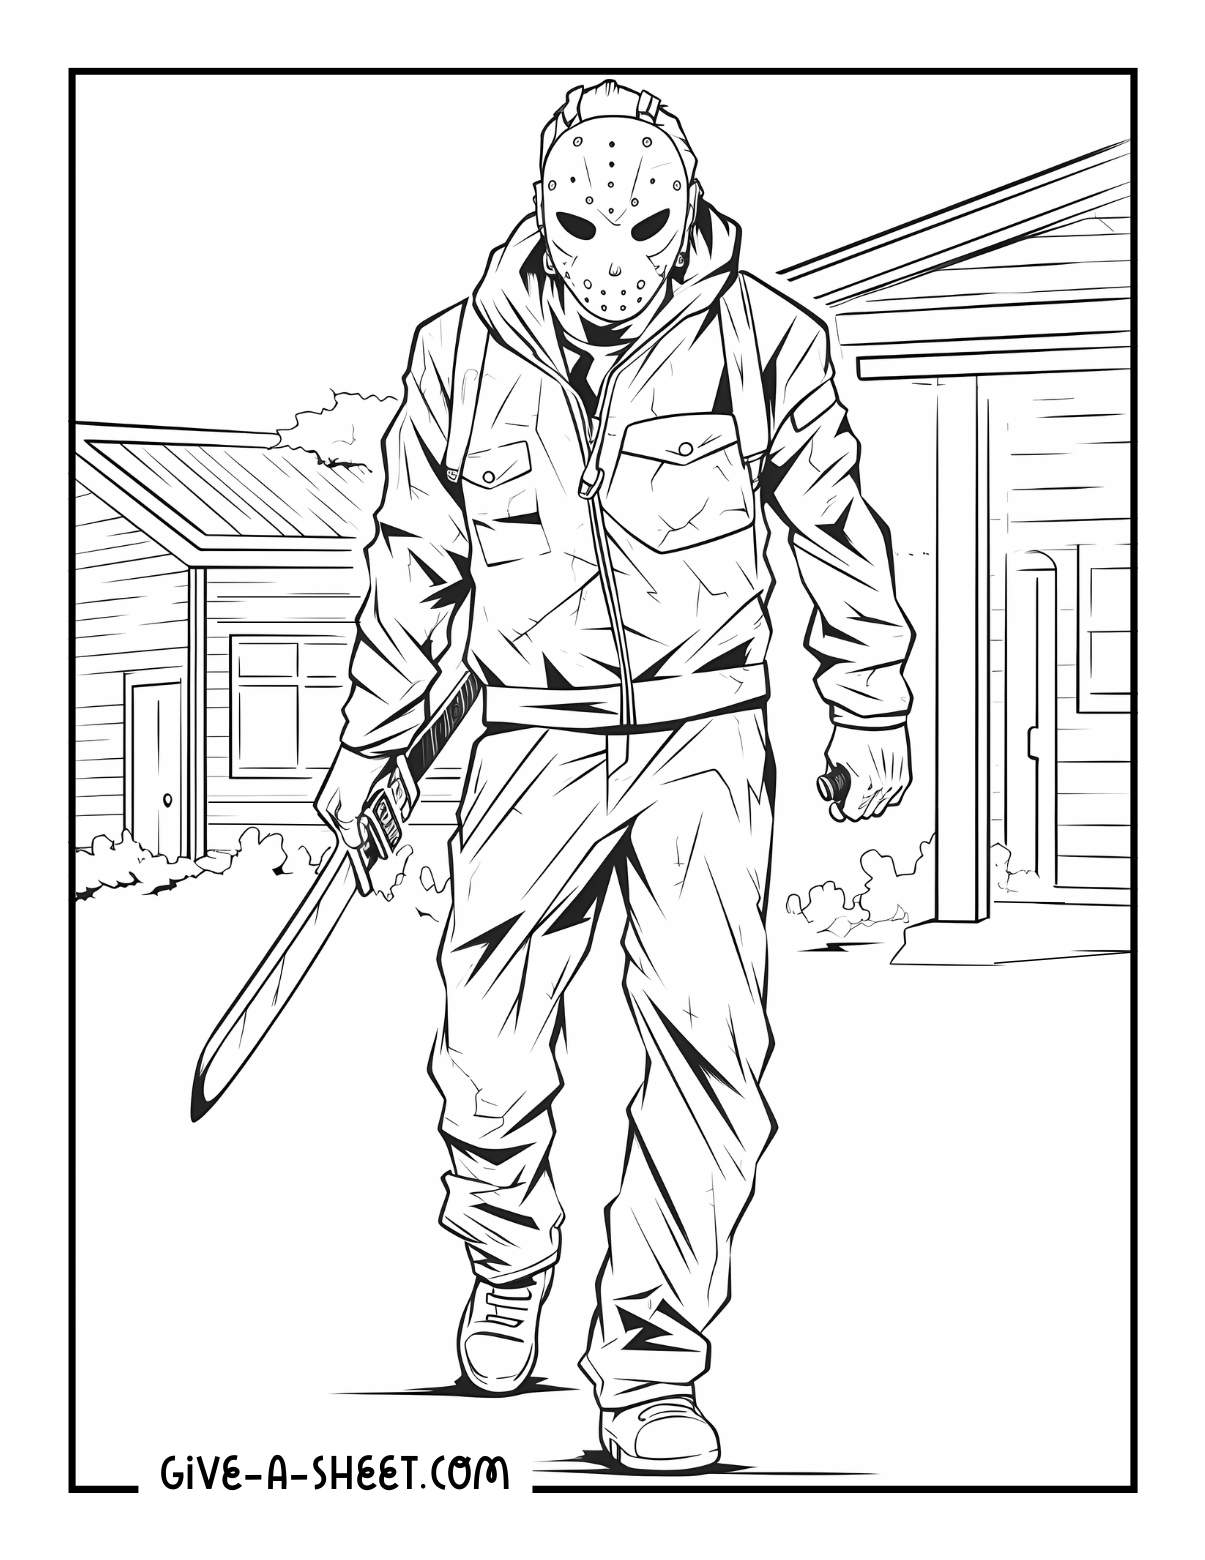 Michael Myers holding a knife halloween horror coloring page for adults.